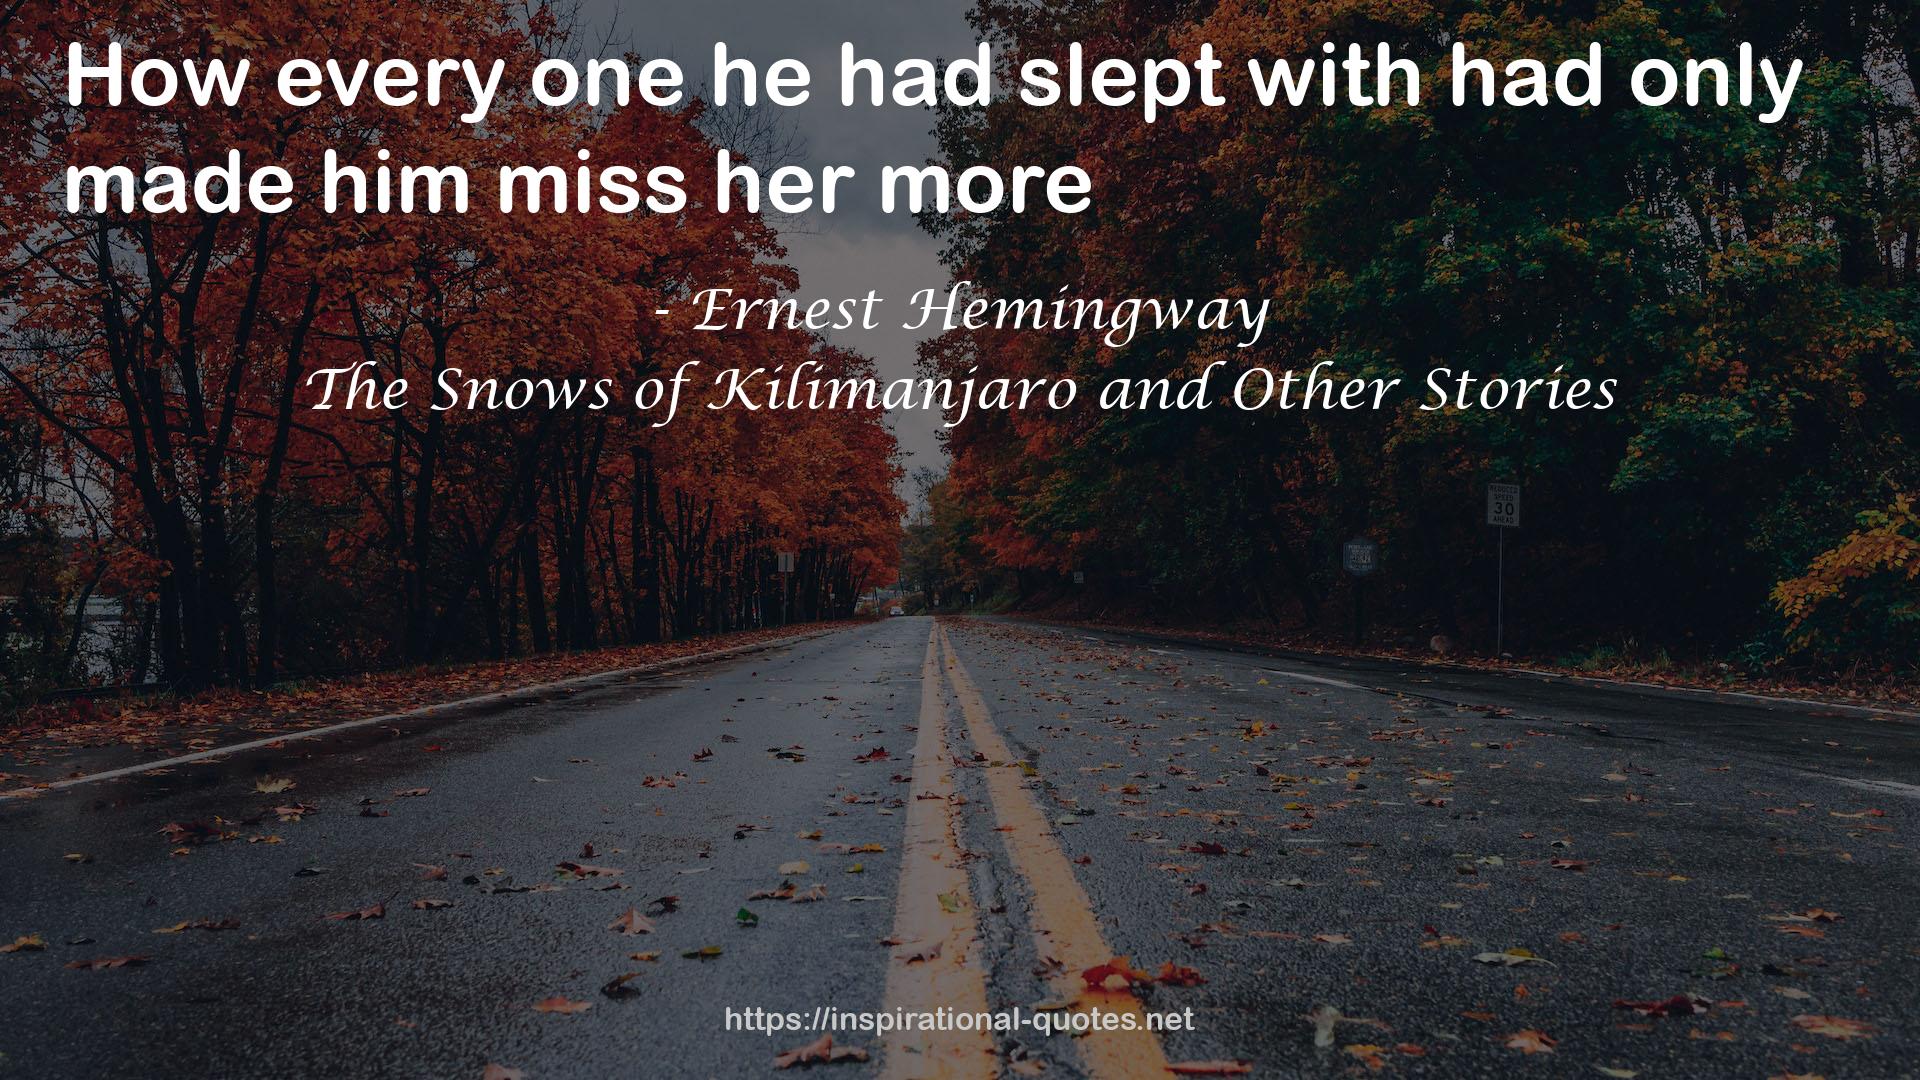 The Snows of Kilimanjaro and Other Stories QUOTES